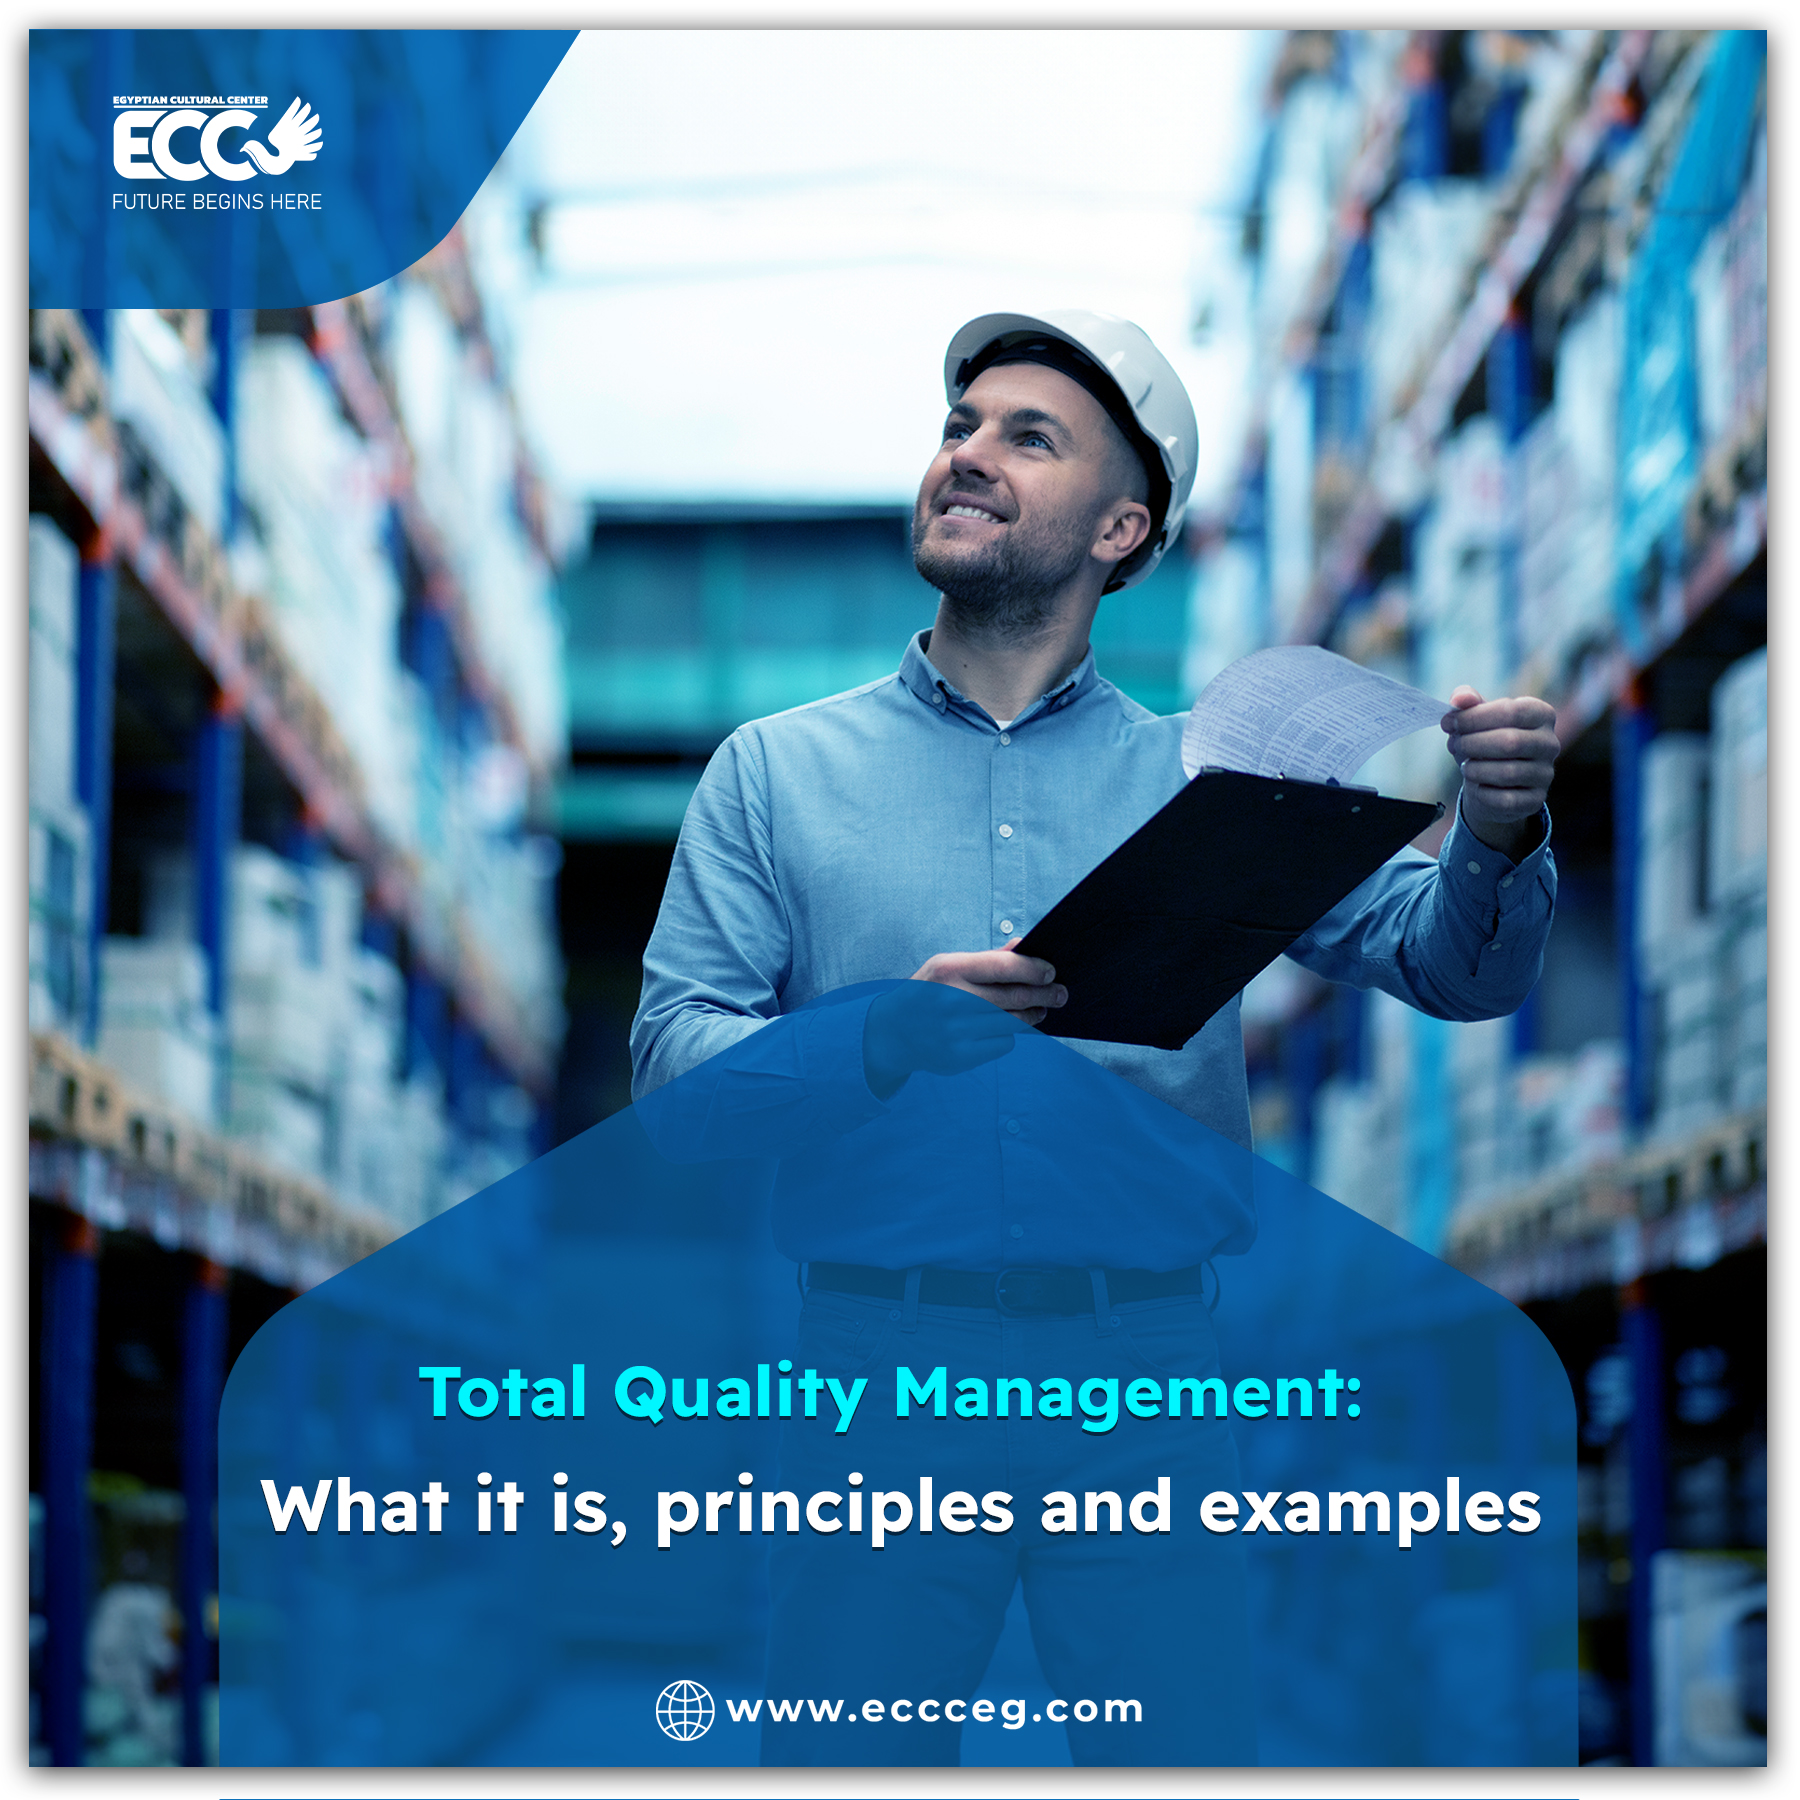 Total Quality Management: What it is, principles and examples